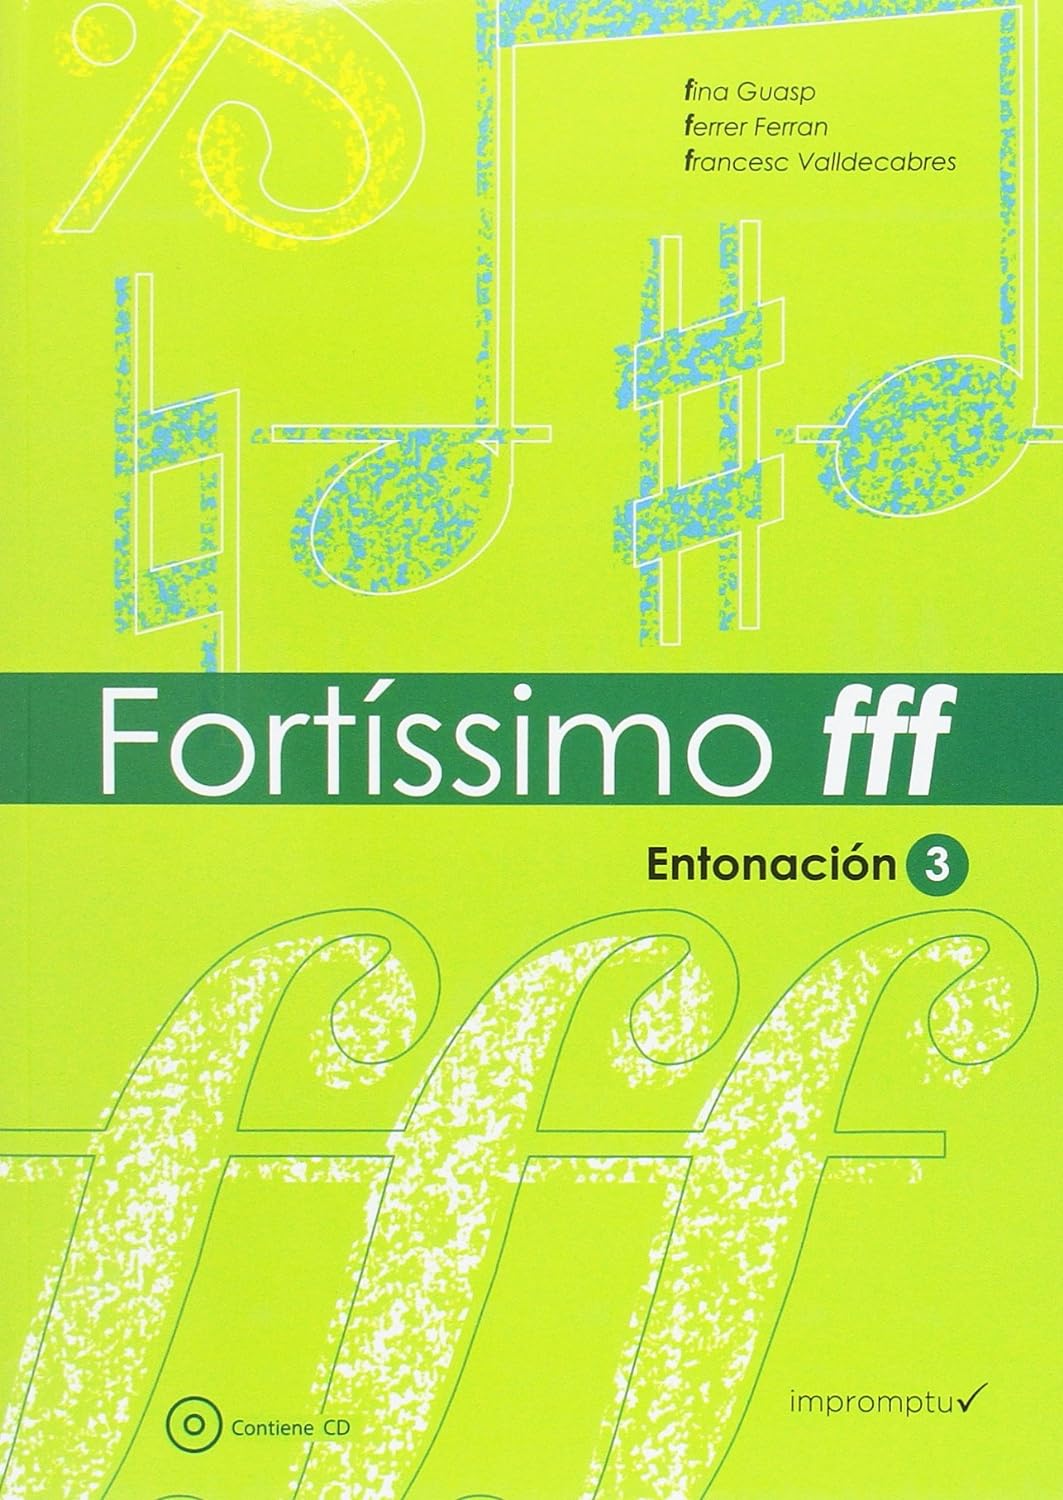 GUASP/FERRER/VALLDECABRES - Fortissimo fff (Entonacion 3) (Inc.CD) - GUASP/FERRER/VALLDECABRES